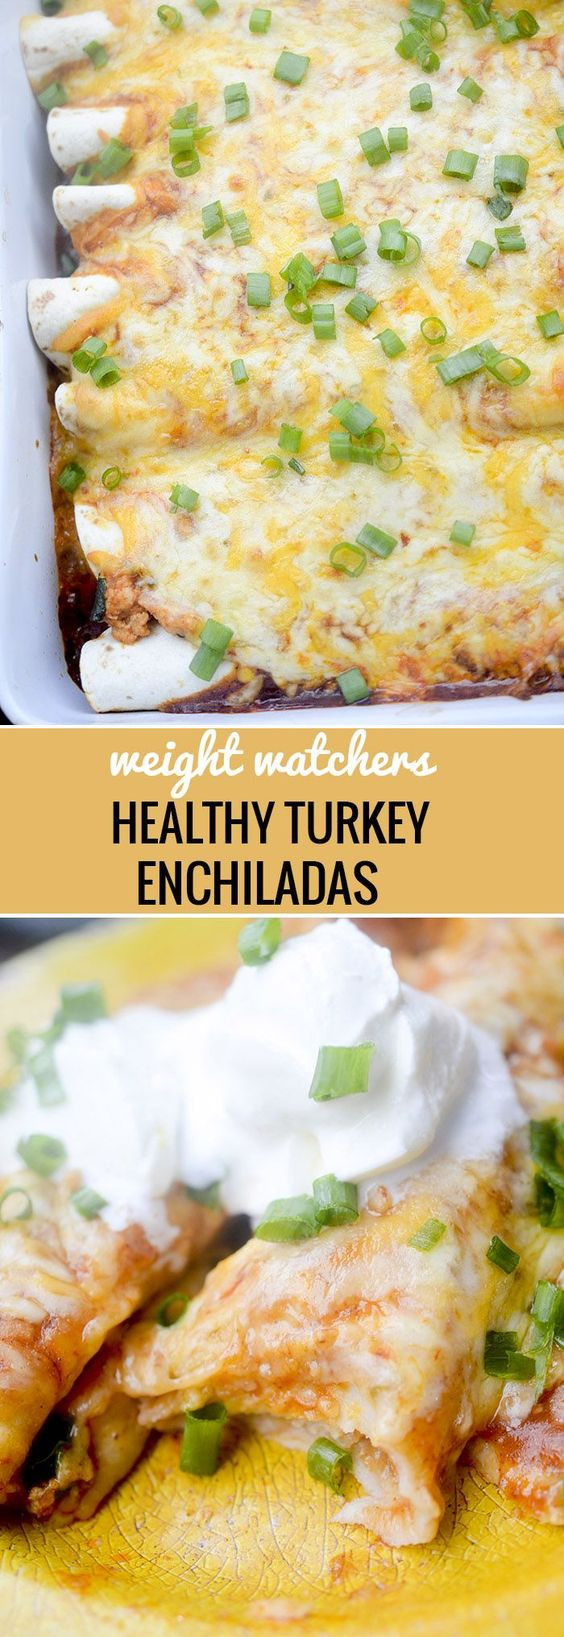 Weight Watchers Recipe Dinner
 50 Weight Watchers Meals with Points Simple Dinner